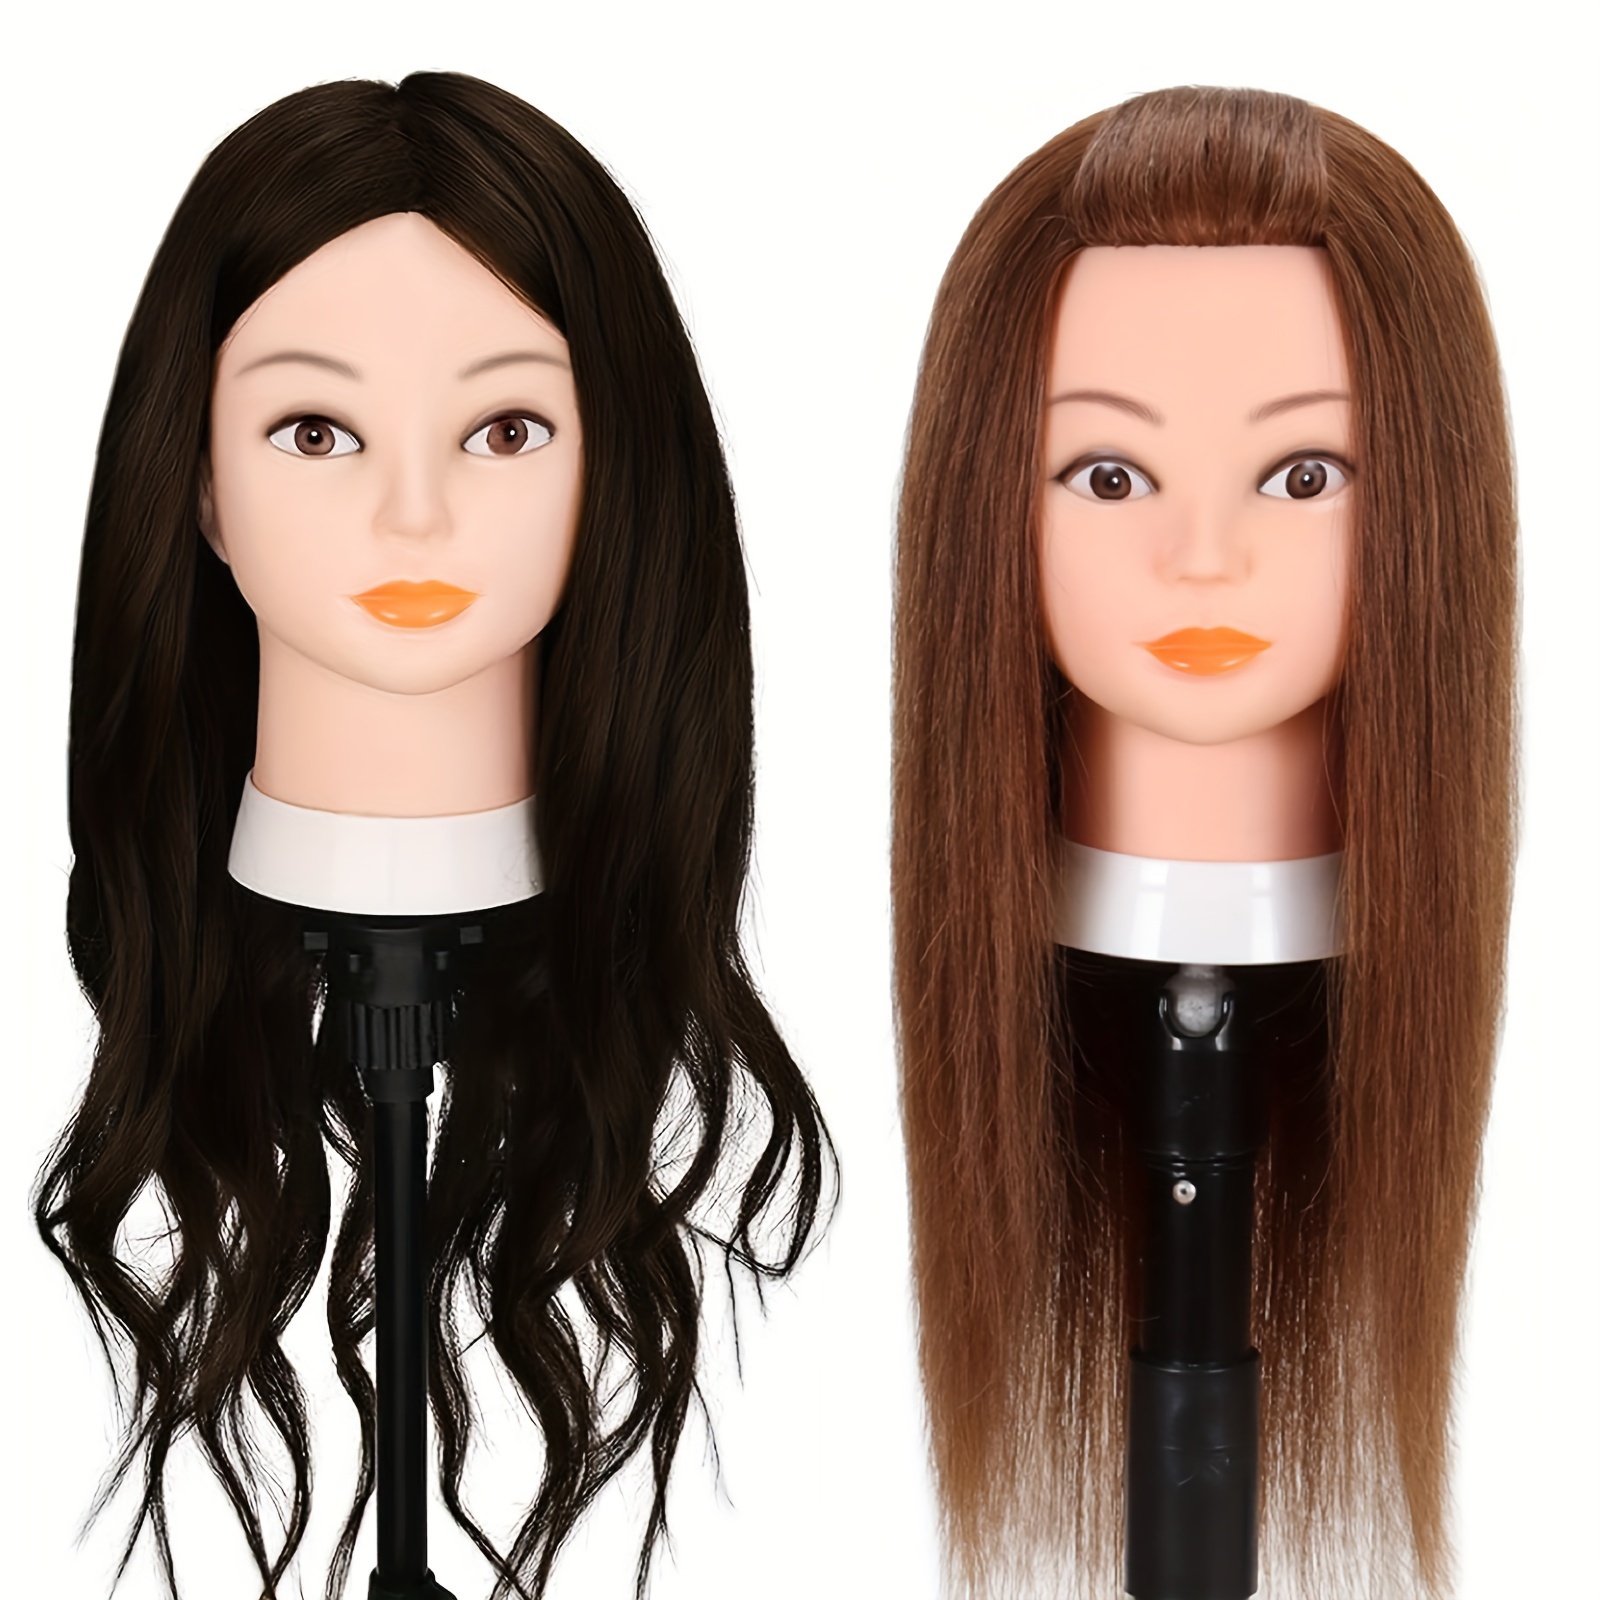 Maniquin Head with 80% Human Hair, 24'' Doll Head for Hair Styling, Manikin  Head with Real Hair, Practice Cosmetology Mannequin Head, DIY Hairdressing